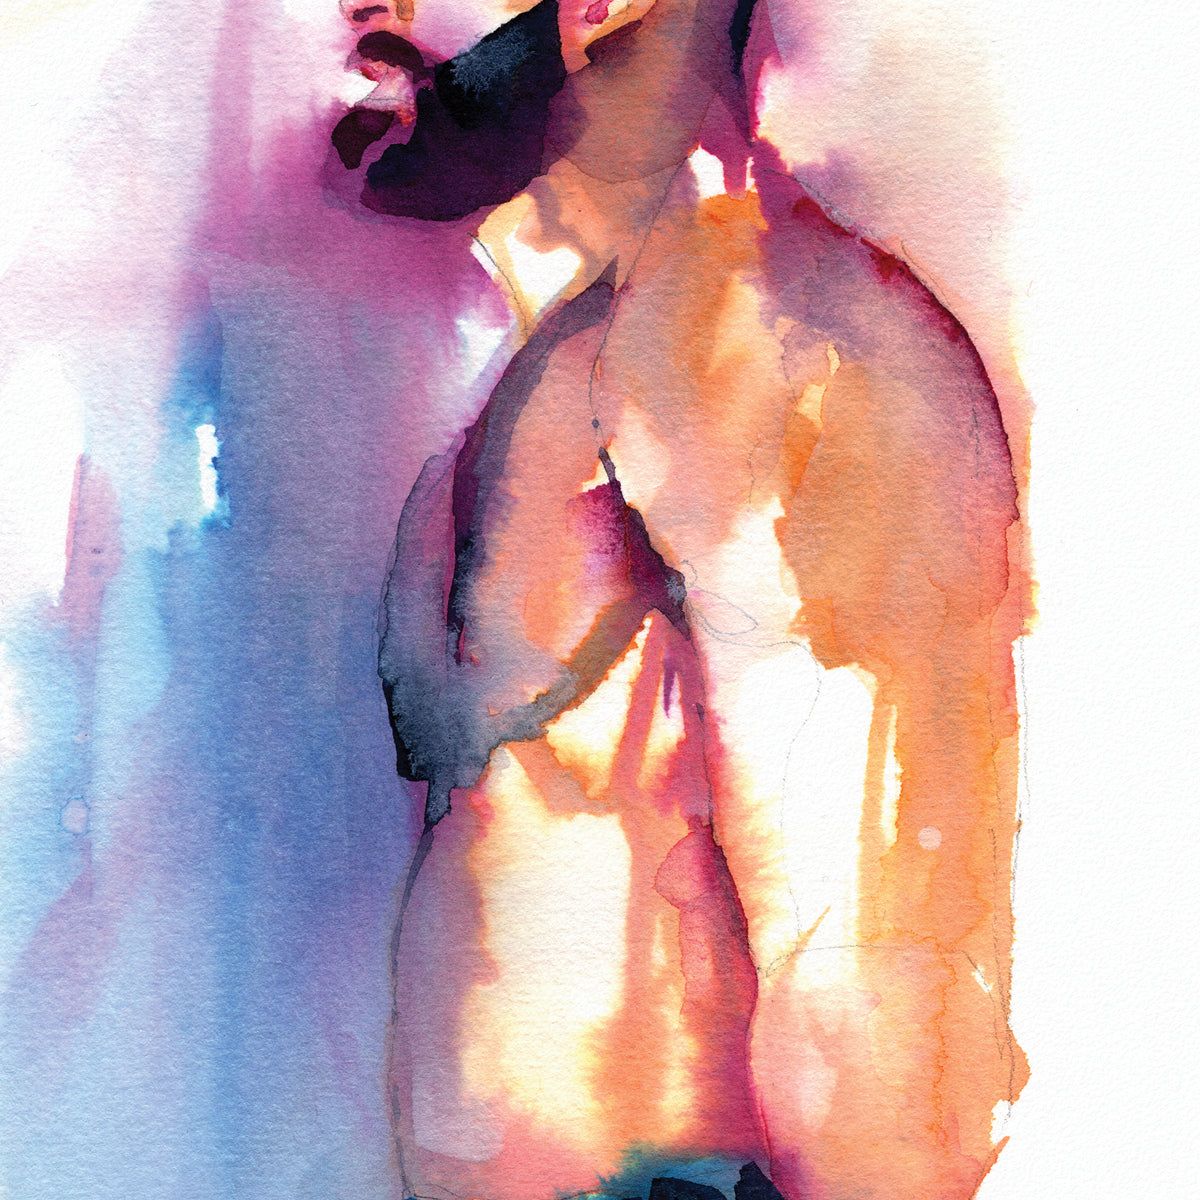 Muscular Male in Blue Jeans - 6x9" Original Watercolor Painting